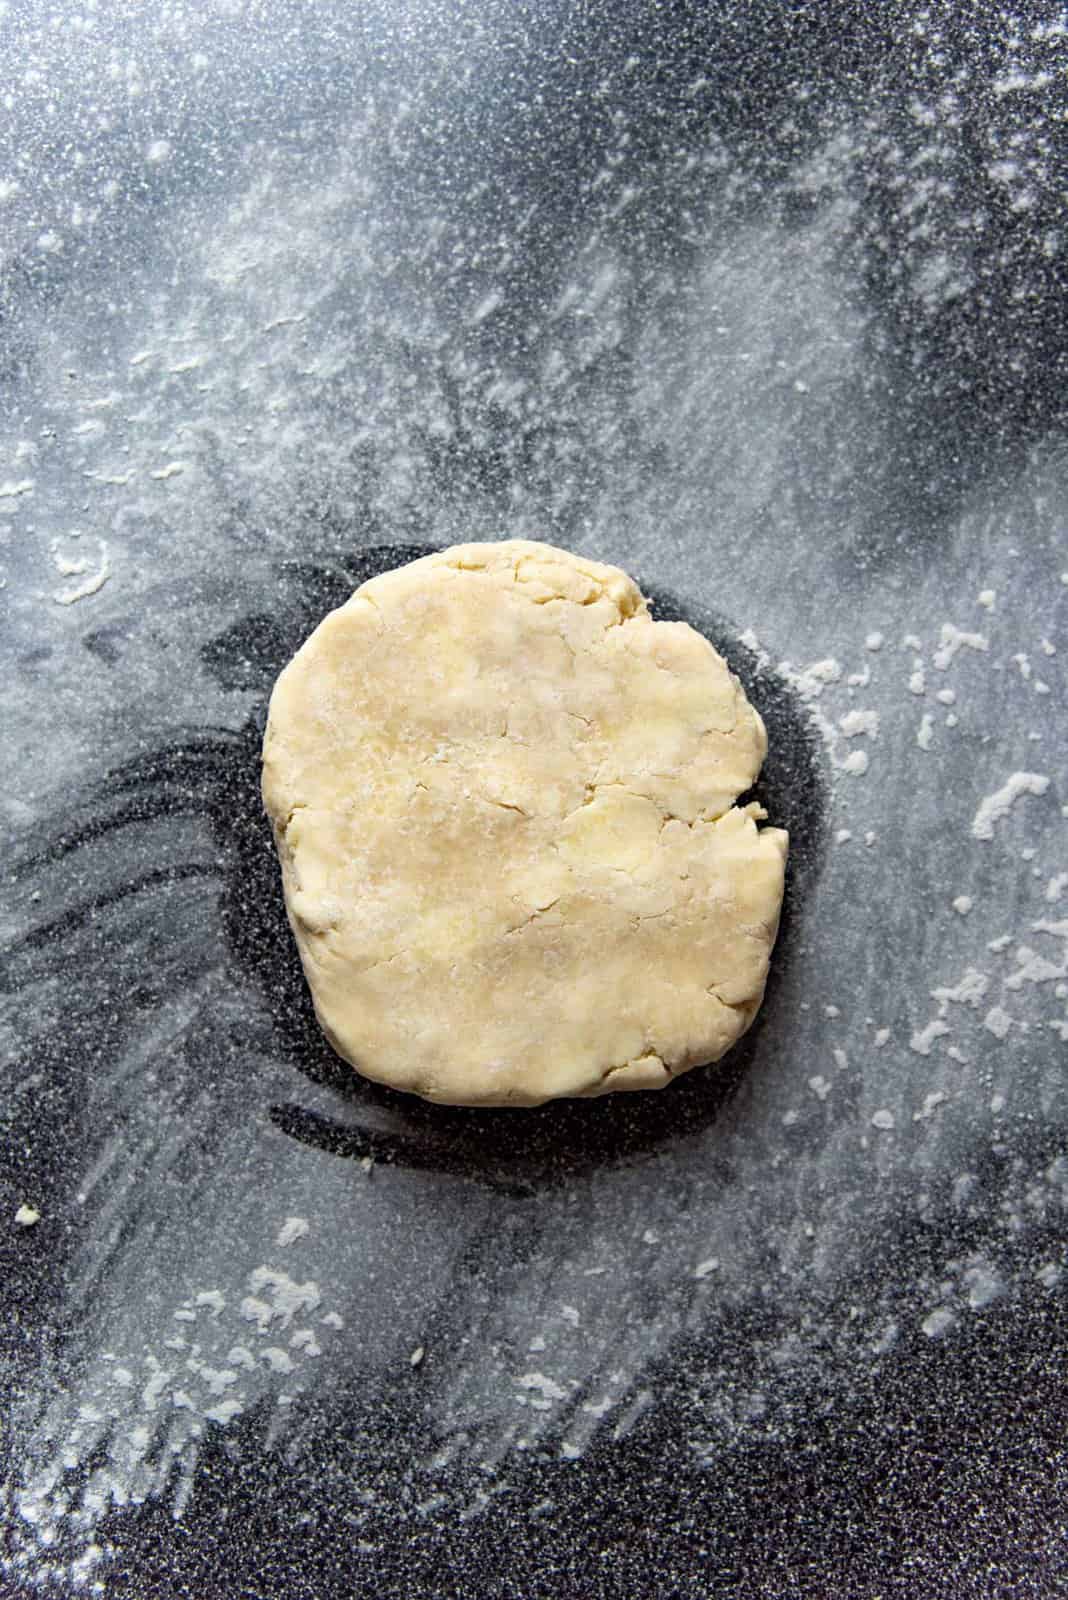 Chilled pie dough disc on a lightly floured surface before rolling it out.